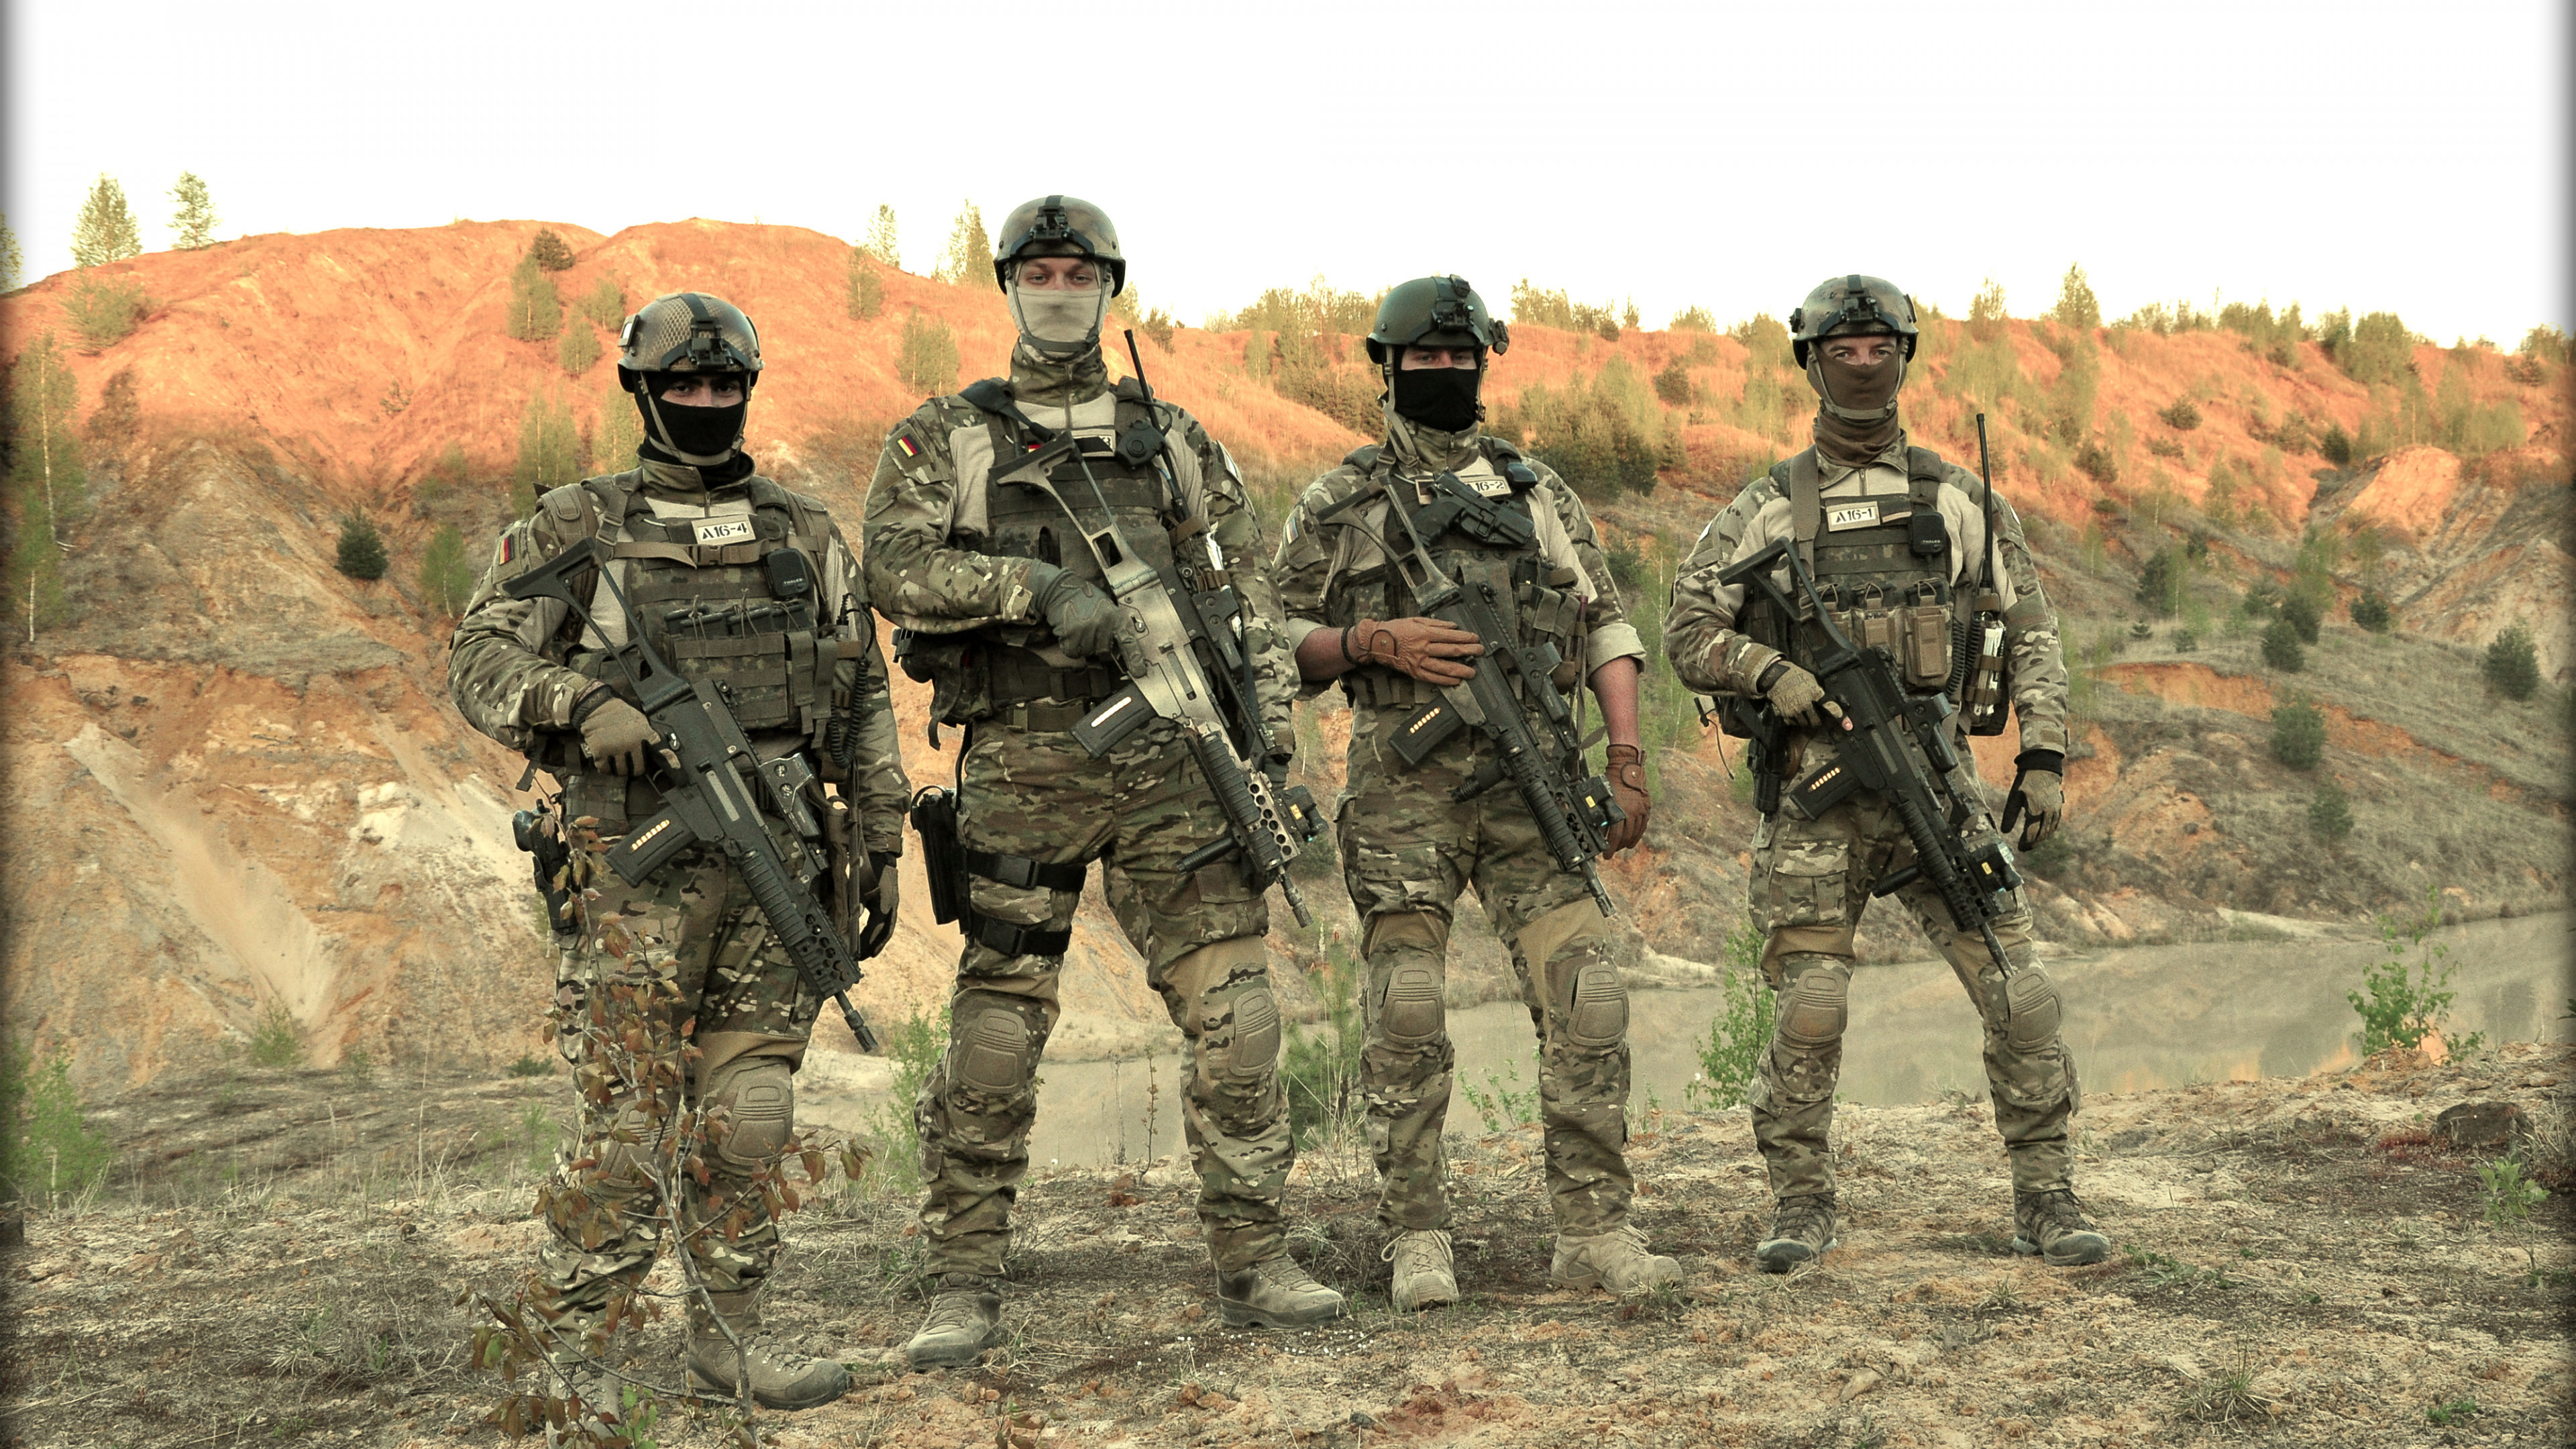 Wallpaper KSK, special forces, Kommando Spezialkrafte, soldier, Bundeswehr,  camo, rifle, field, Military #1795 - Page 23